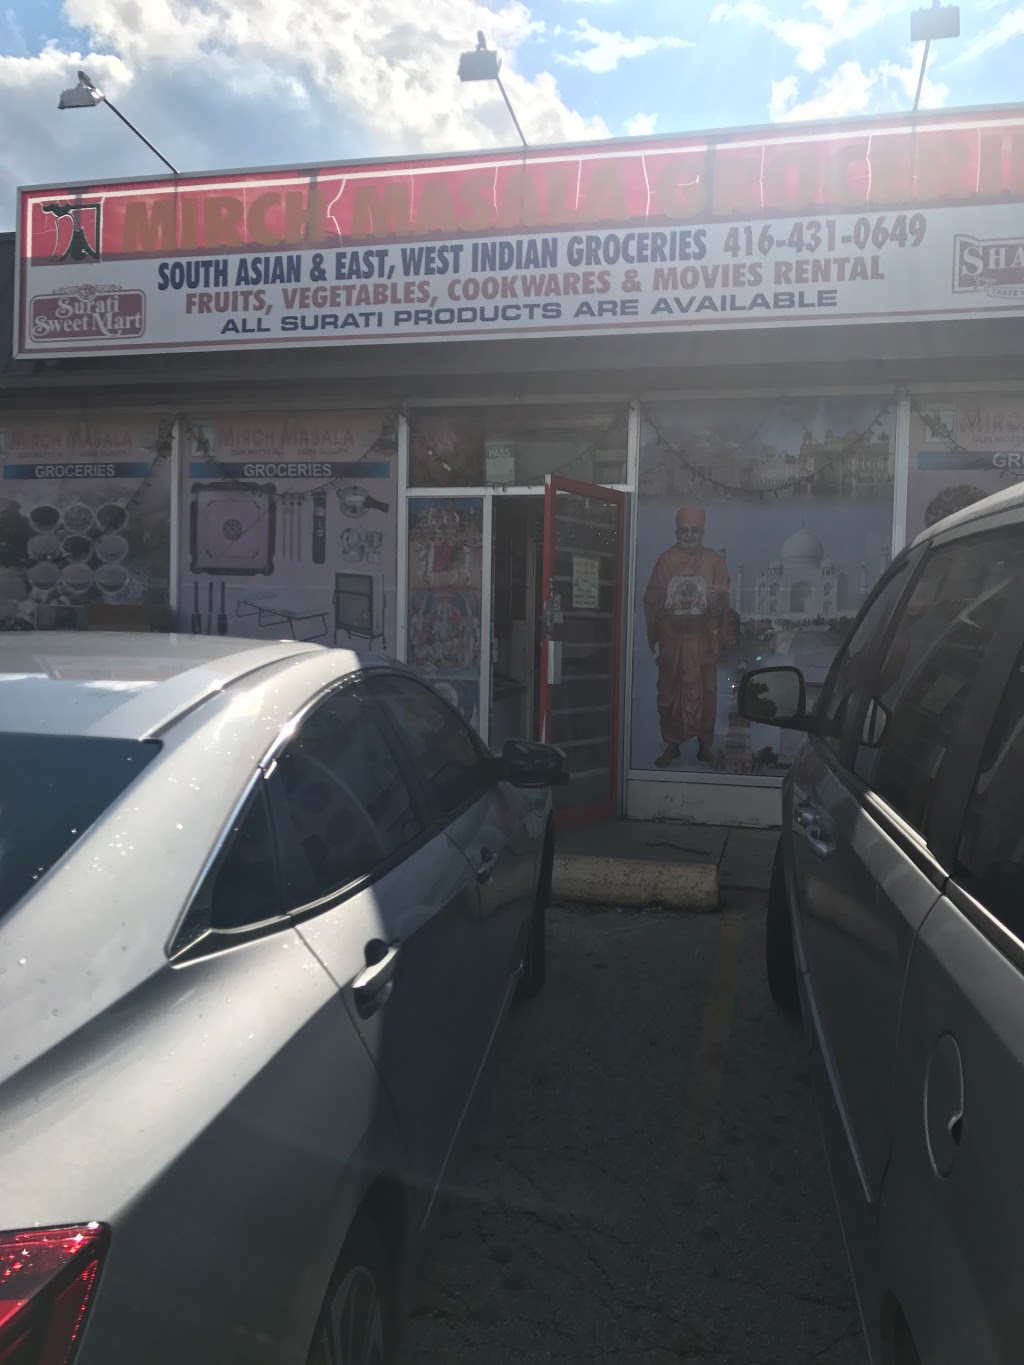 Mirch Masala Groceries Inc | store | 860 Markham Rd, Scarborough, ON M1H 2Y2, Canada | 4164310649 OR +1 416-431-0649